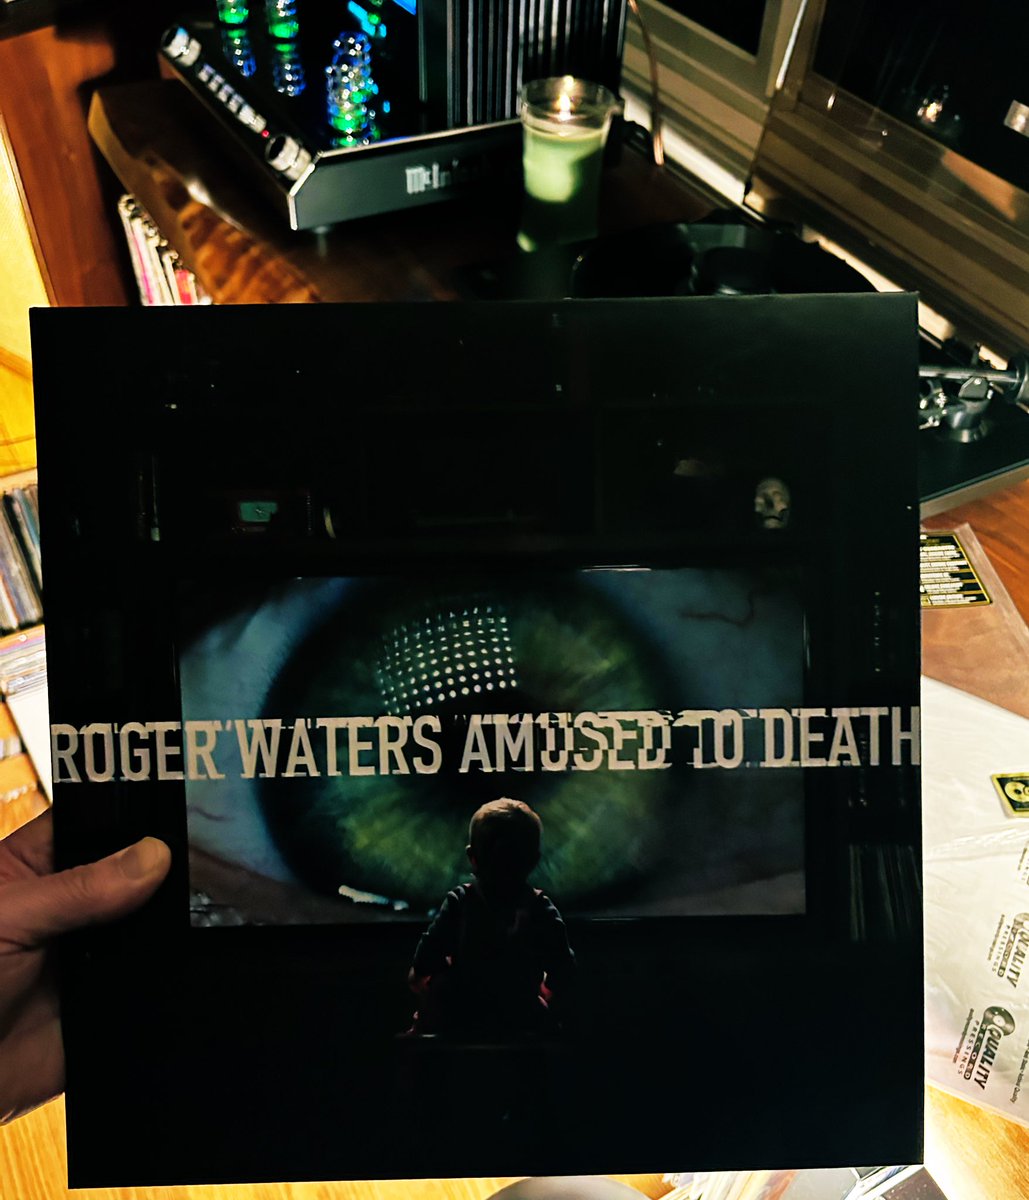 This Roger Waters album blows me away.